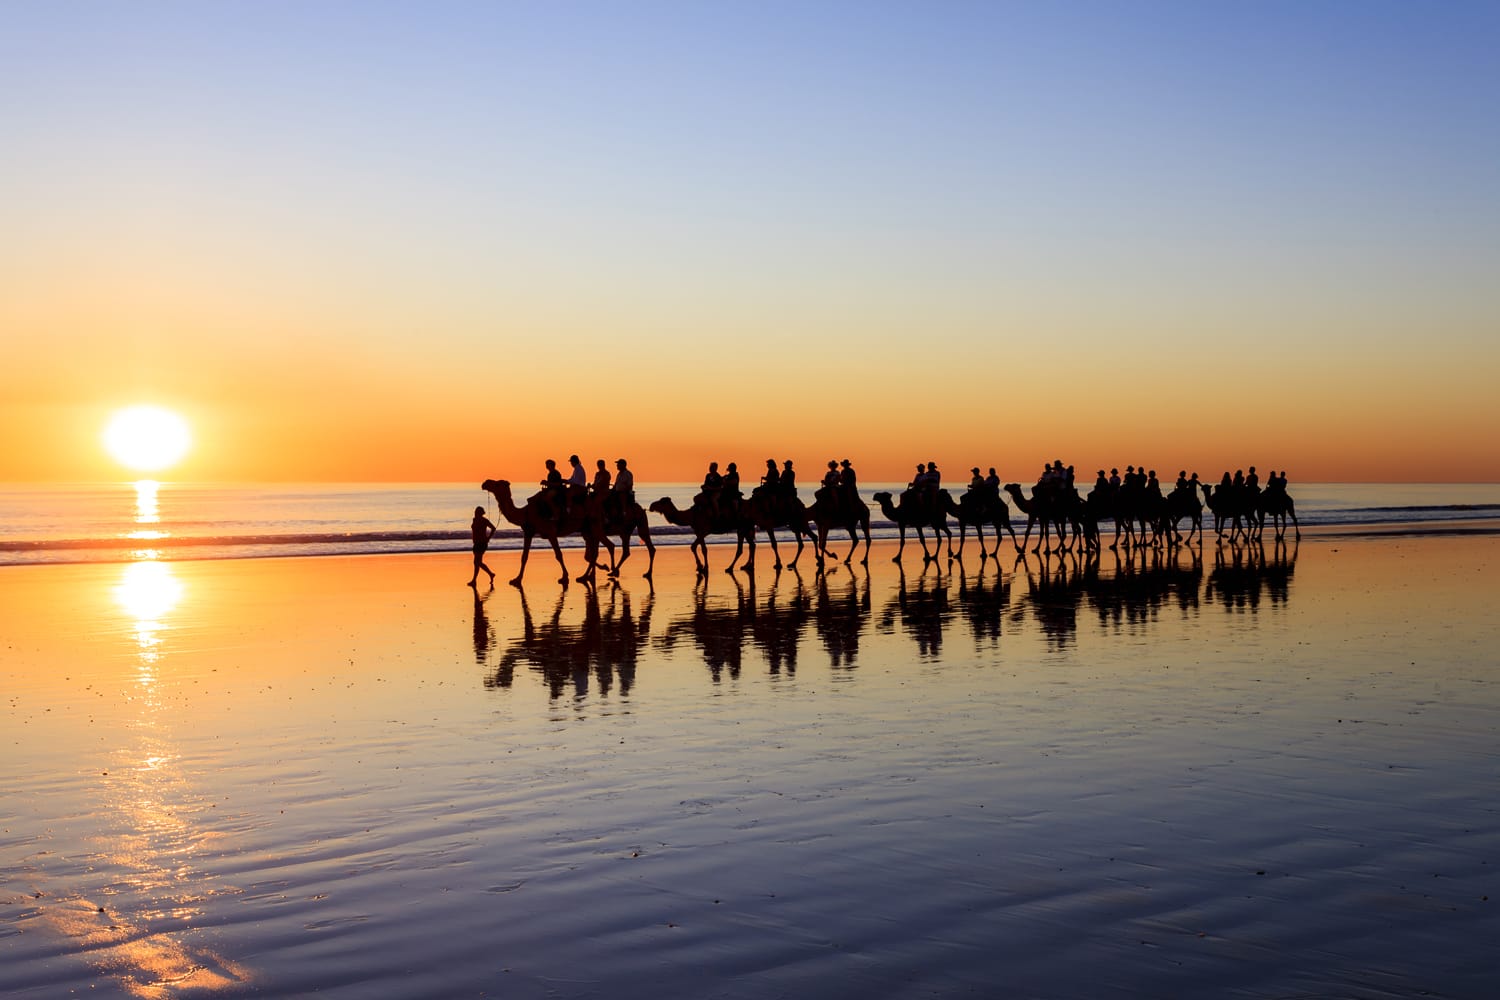 Camels on beach at sunset, Broome, Western Australia